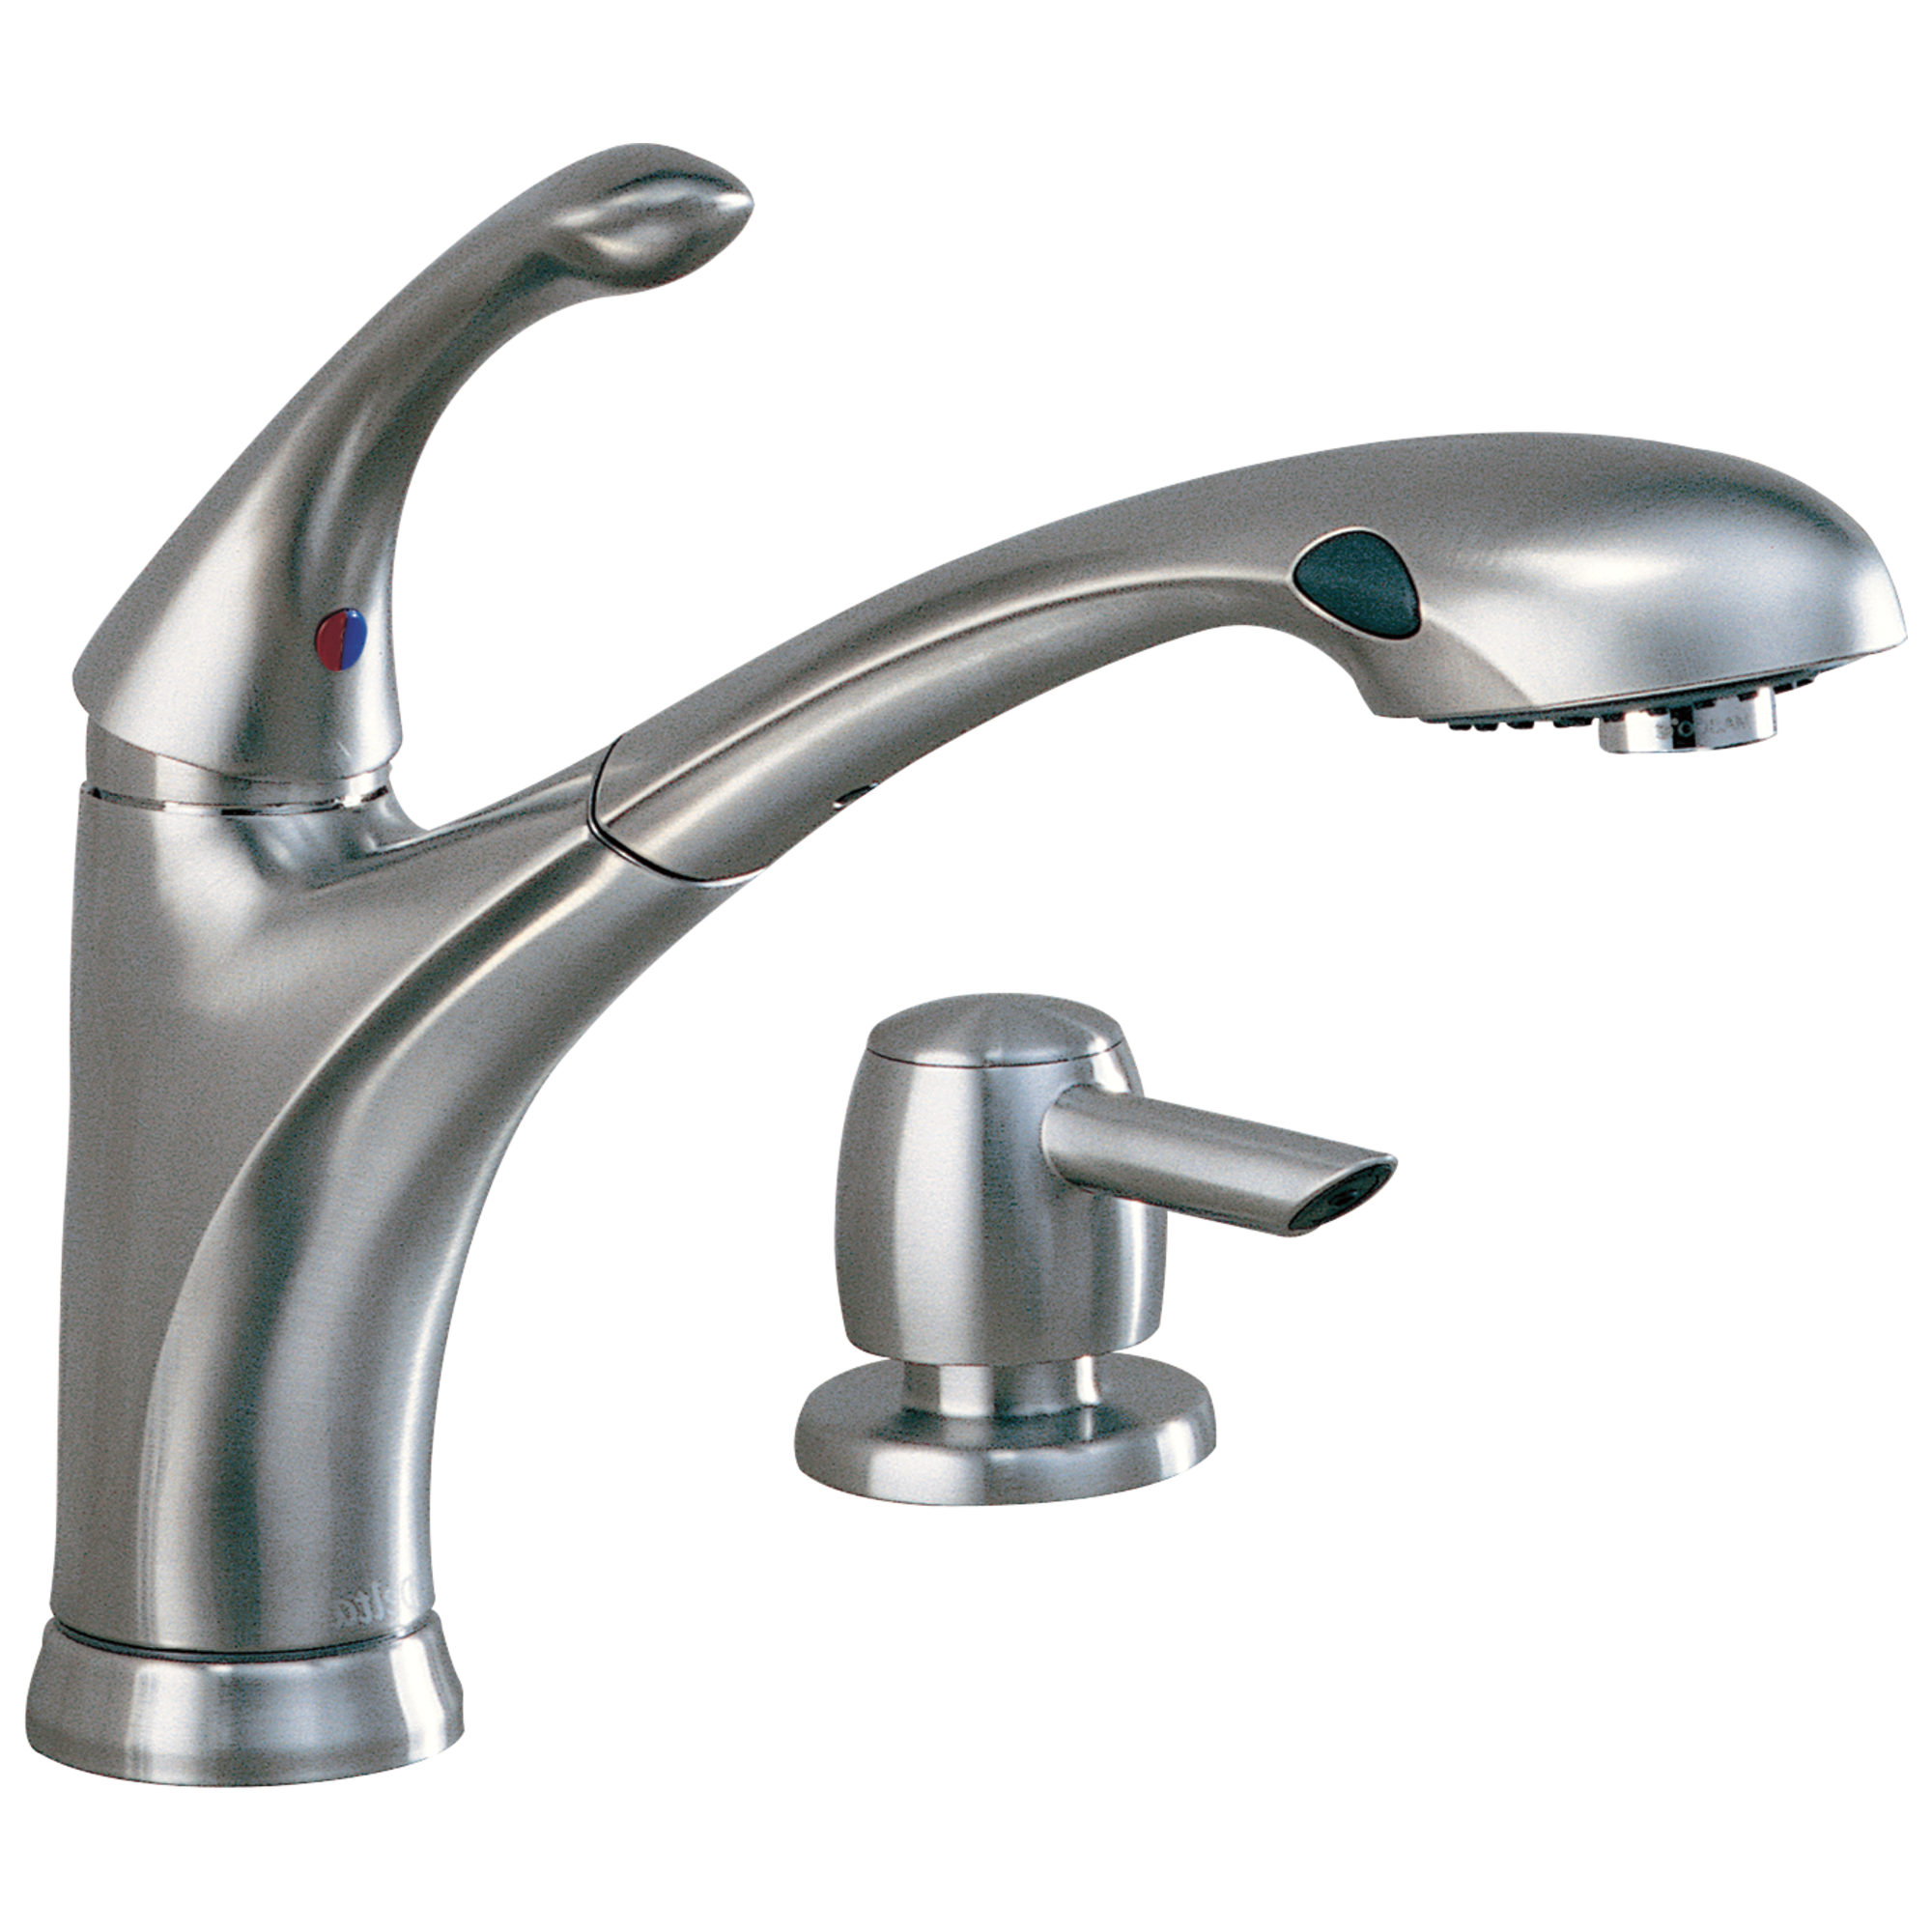 FREE PRIORITY Delta 16927-SSSD-DST Debonair Stainless Pull Out Kitchen Faucet 